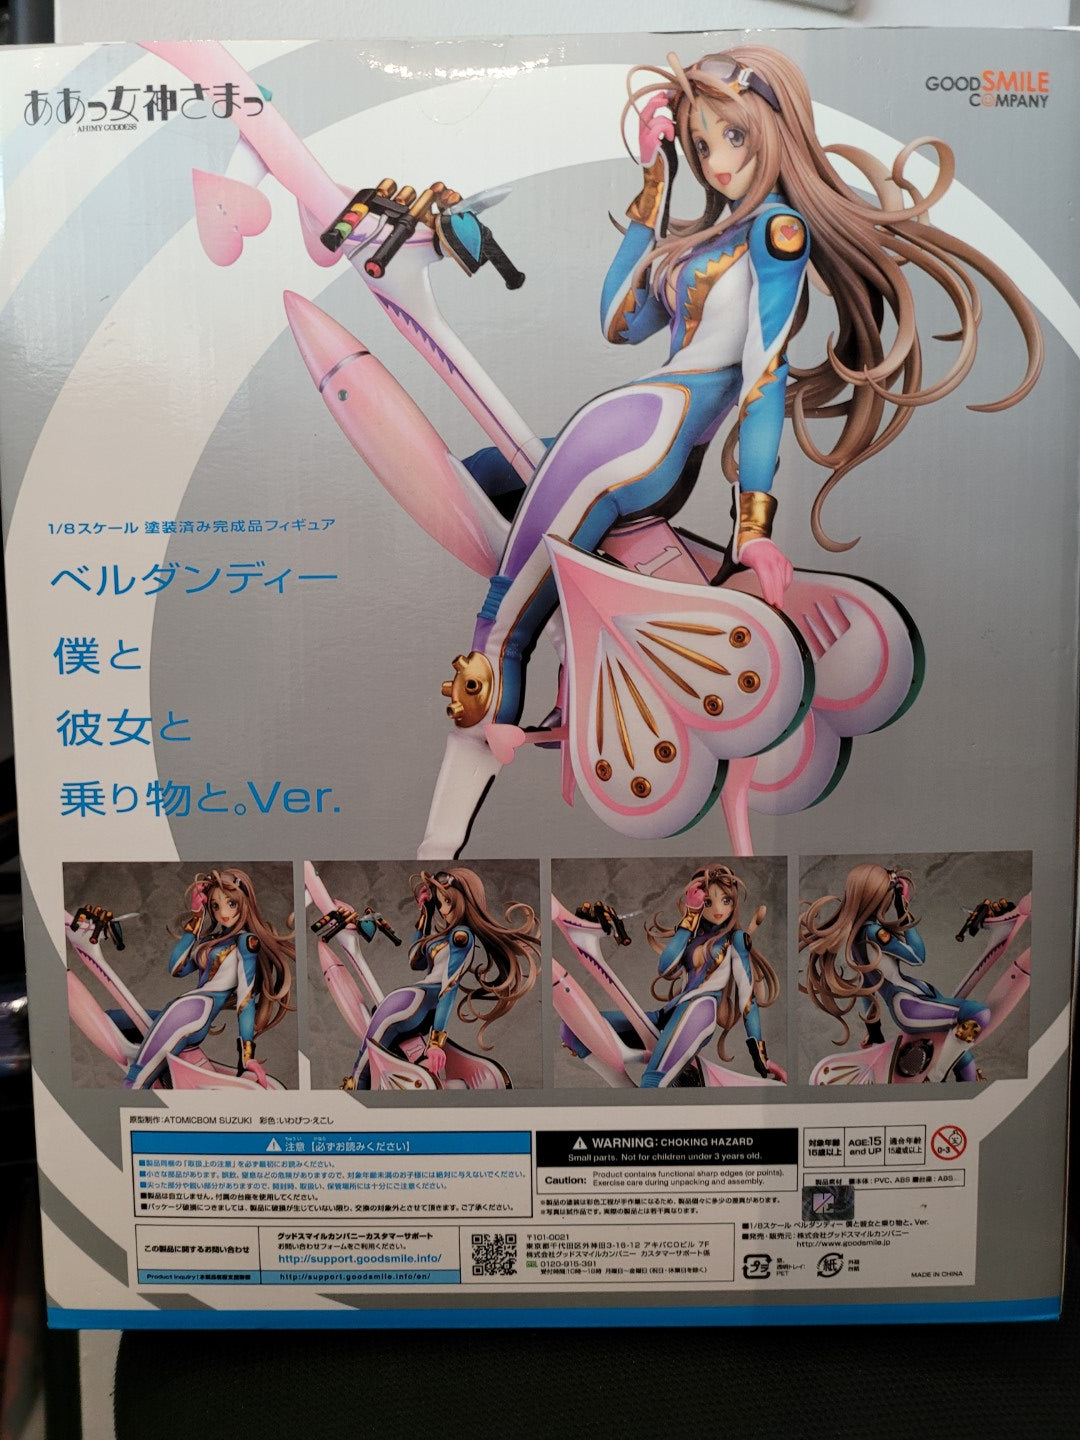 Oh My Goddess! Belldandy With me and her Vehicles Ver. 1/8 Scale Figur (Good Smile Company)